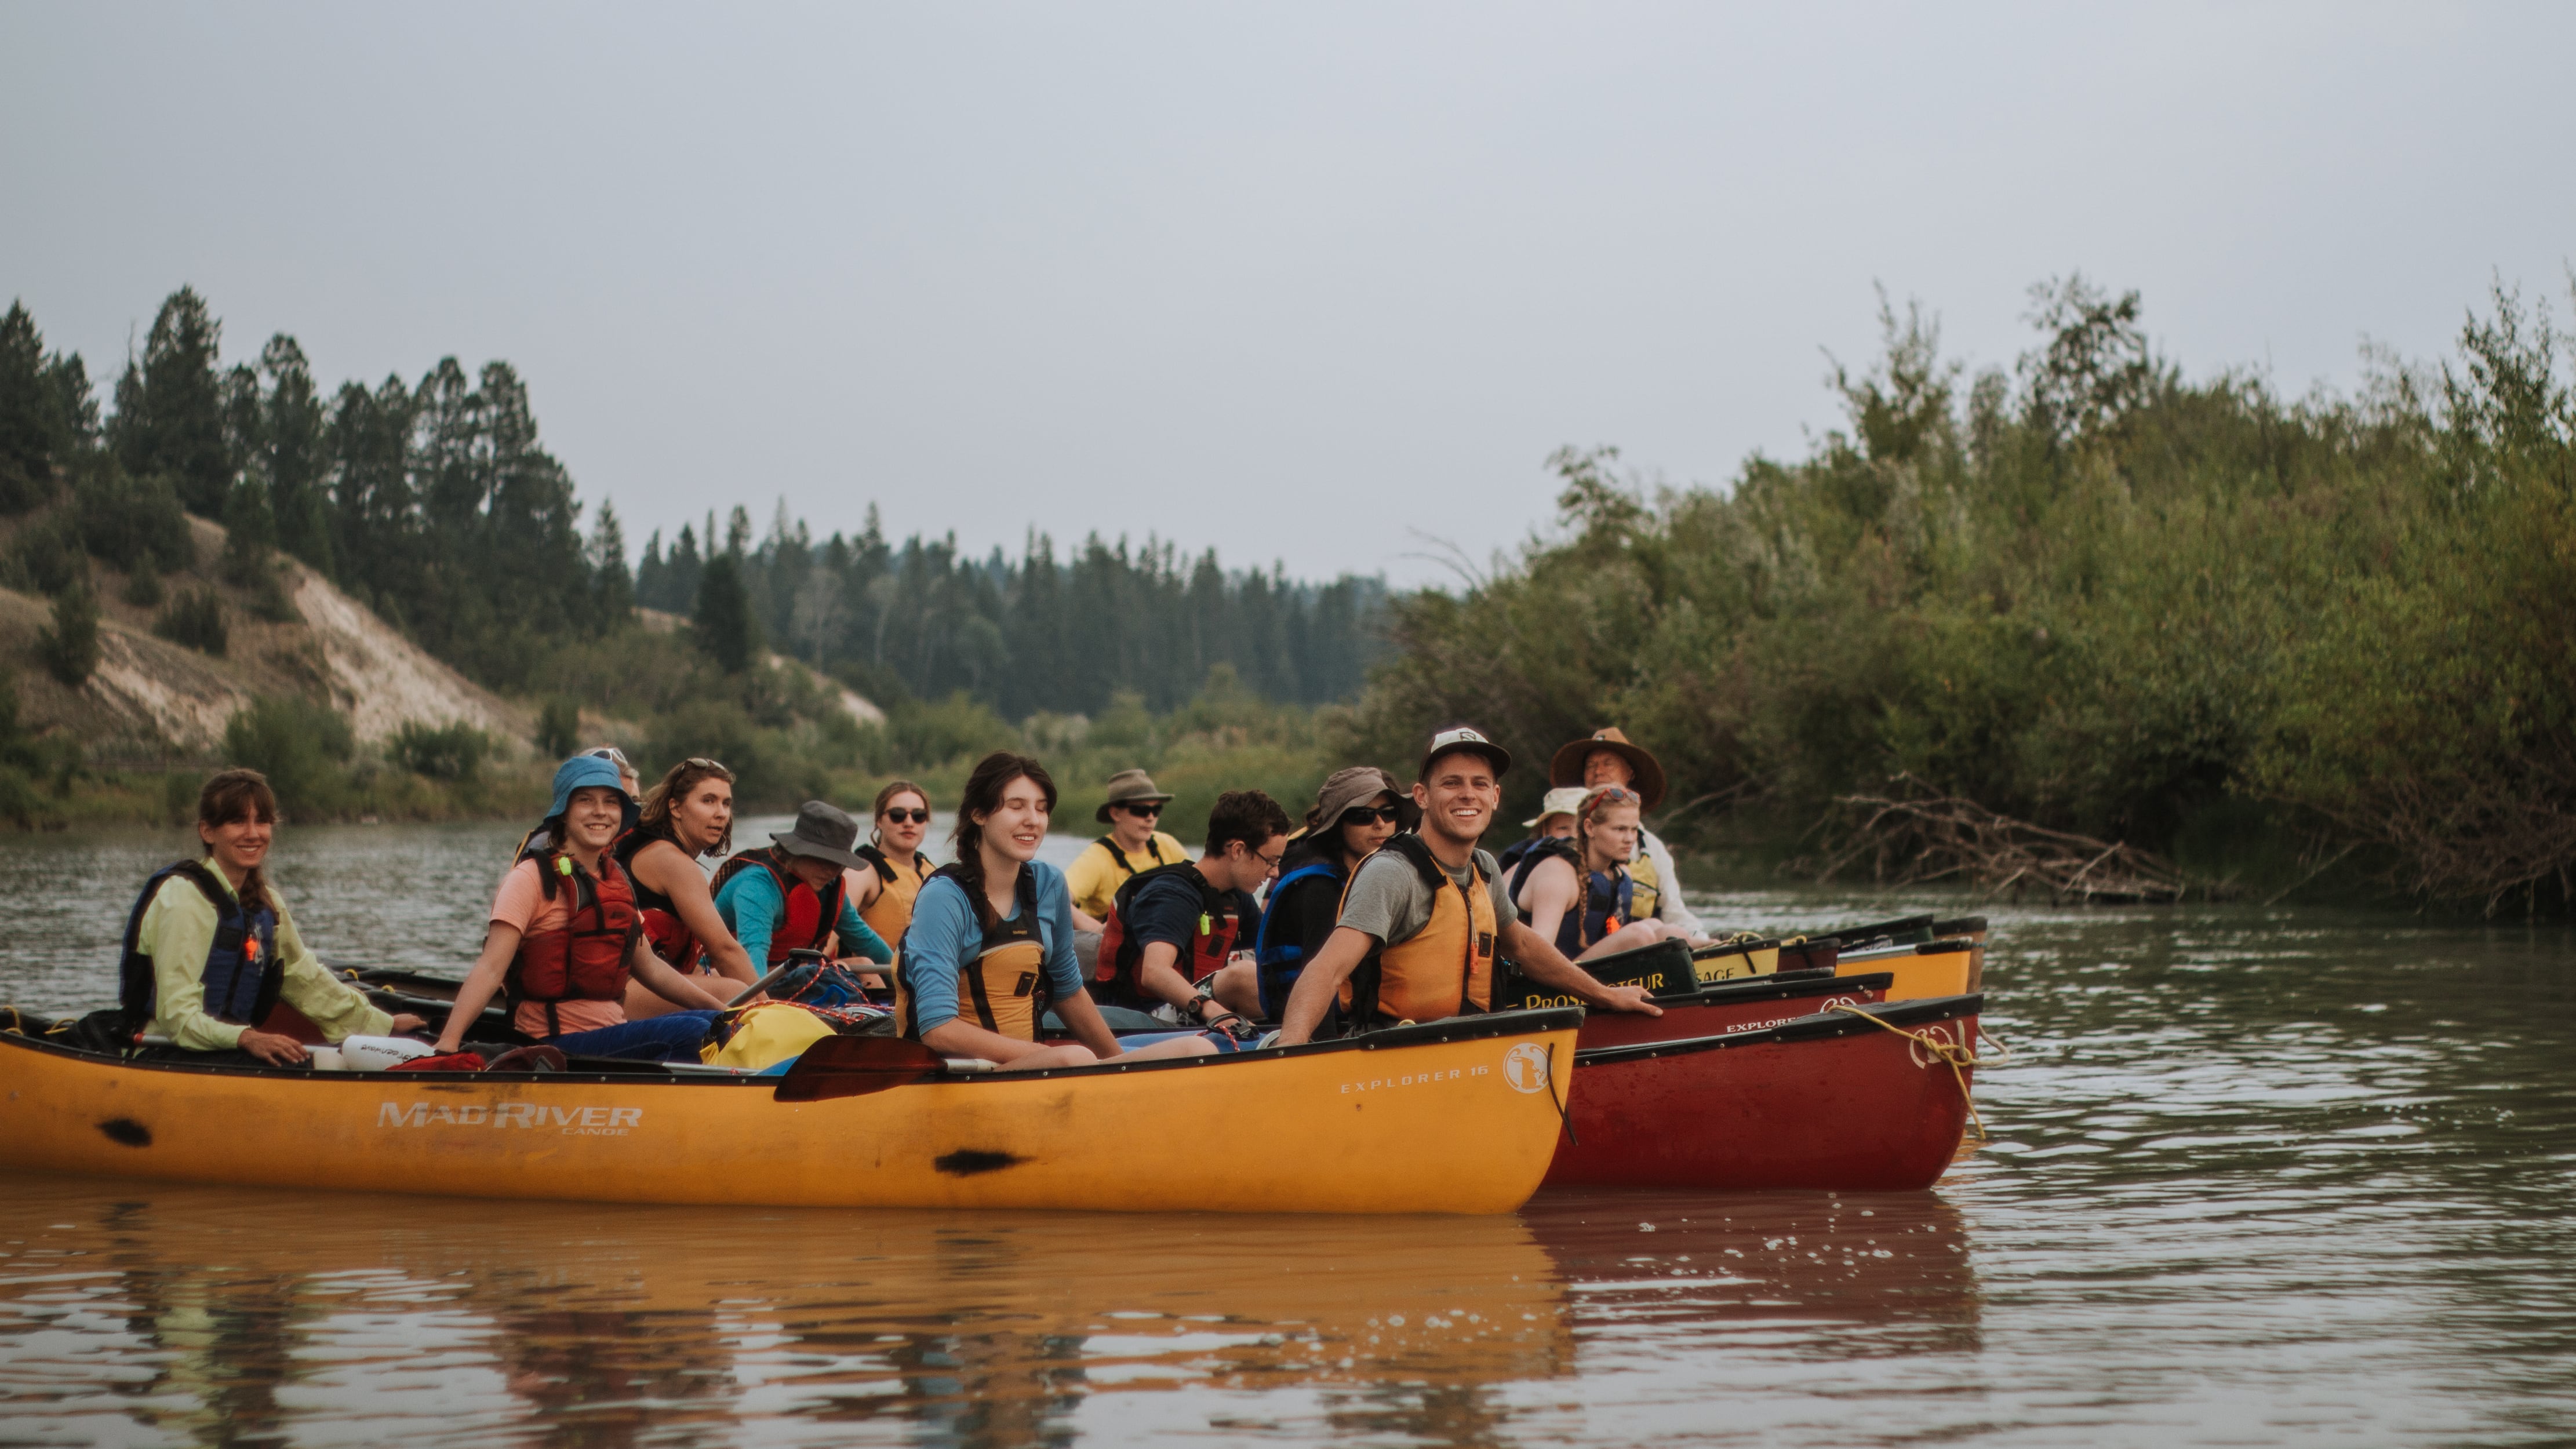 Wildsight, SD8 offer students chance to paddle and learn